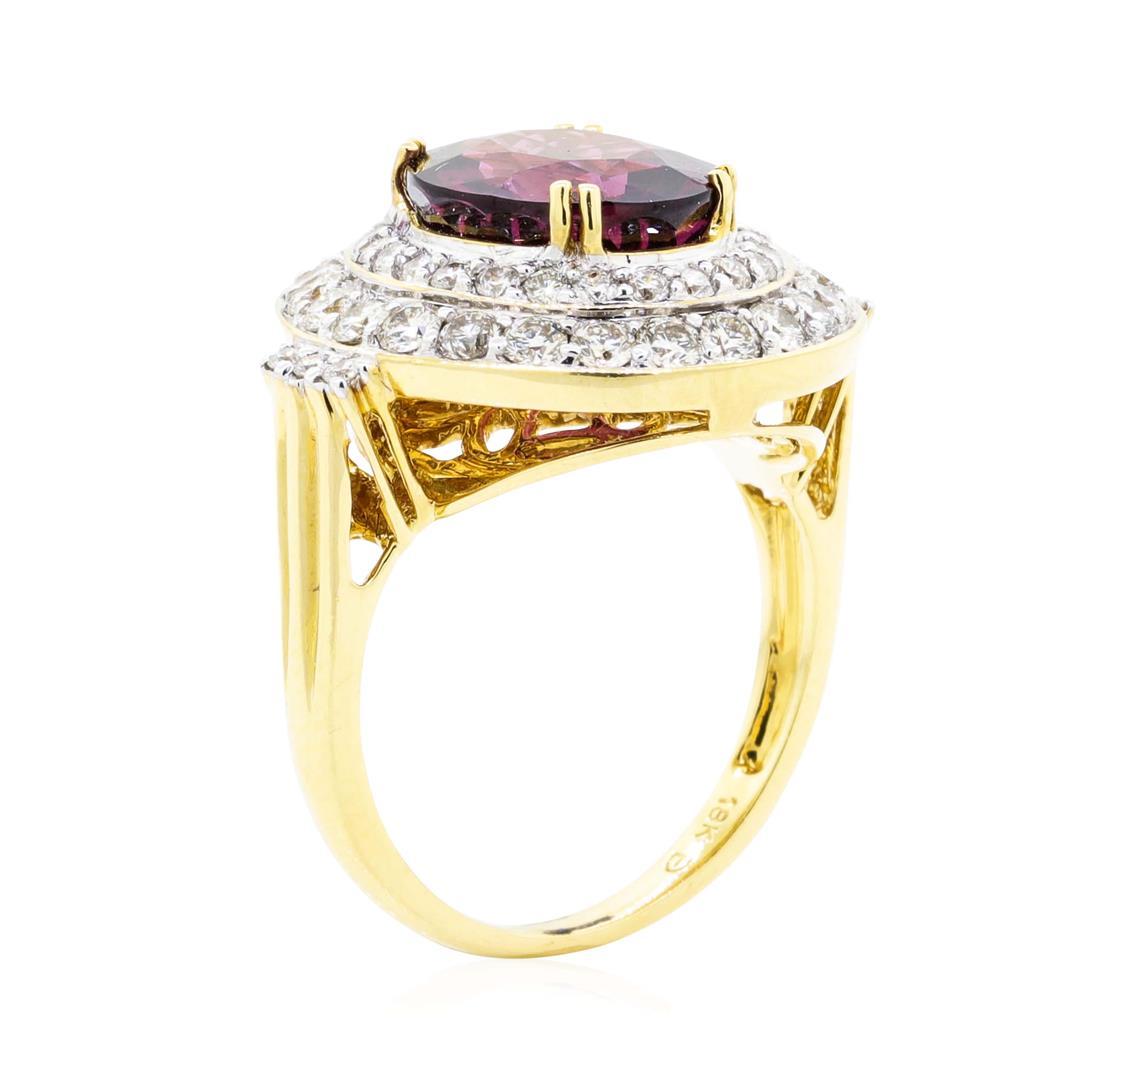 6.64 ctw Oval Mixed Lavender Spinel And Round Brilliant Cut Diamond Ring - 18KT